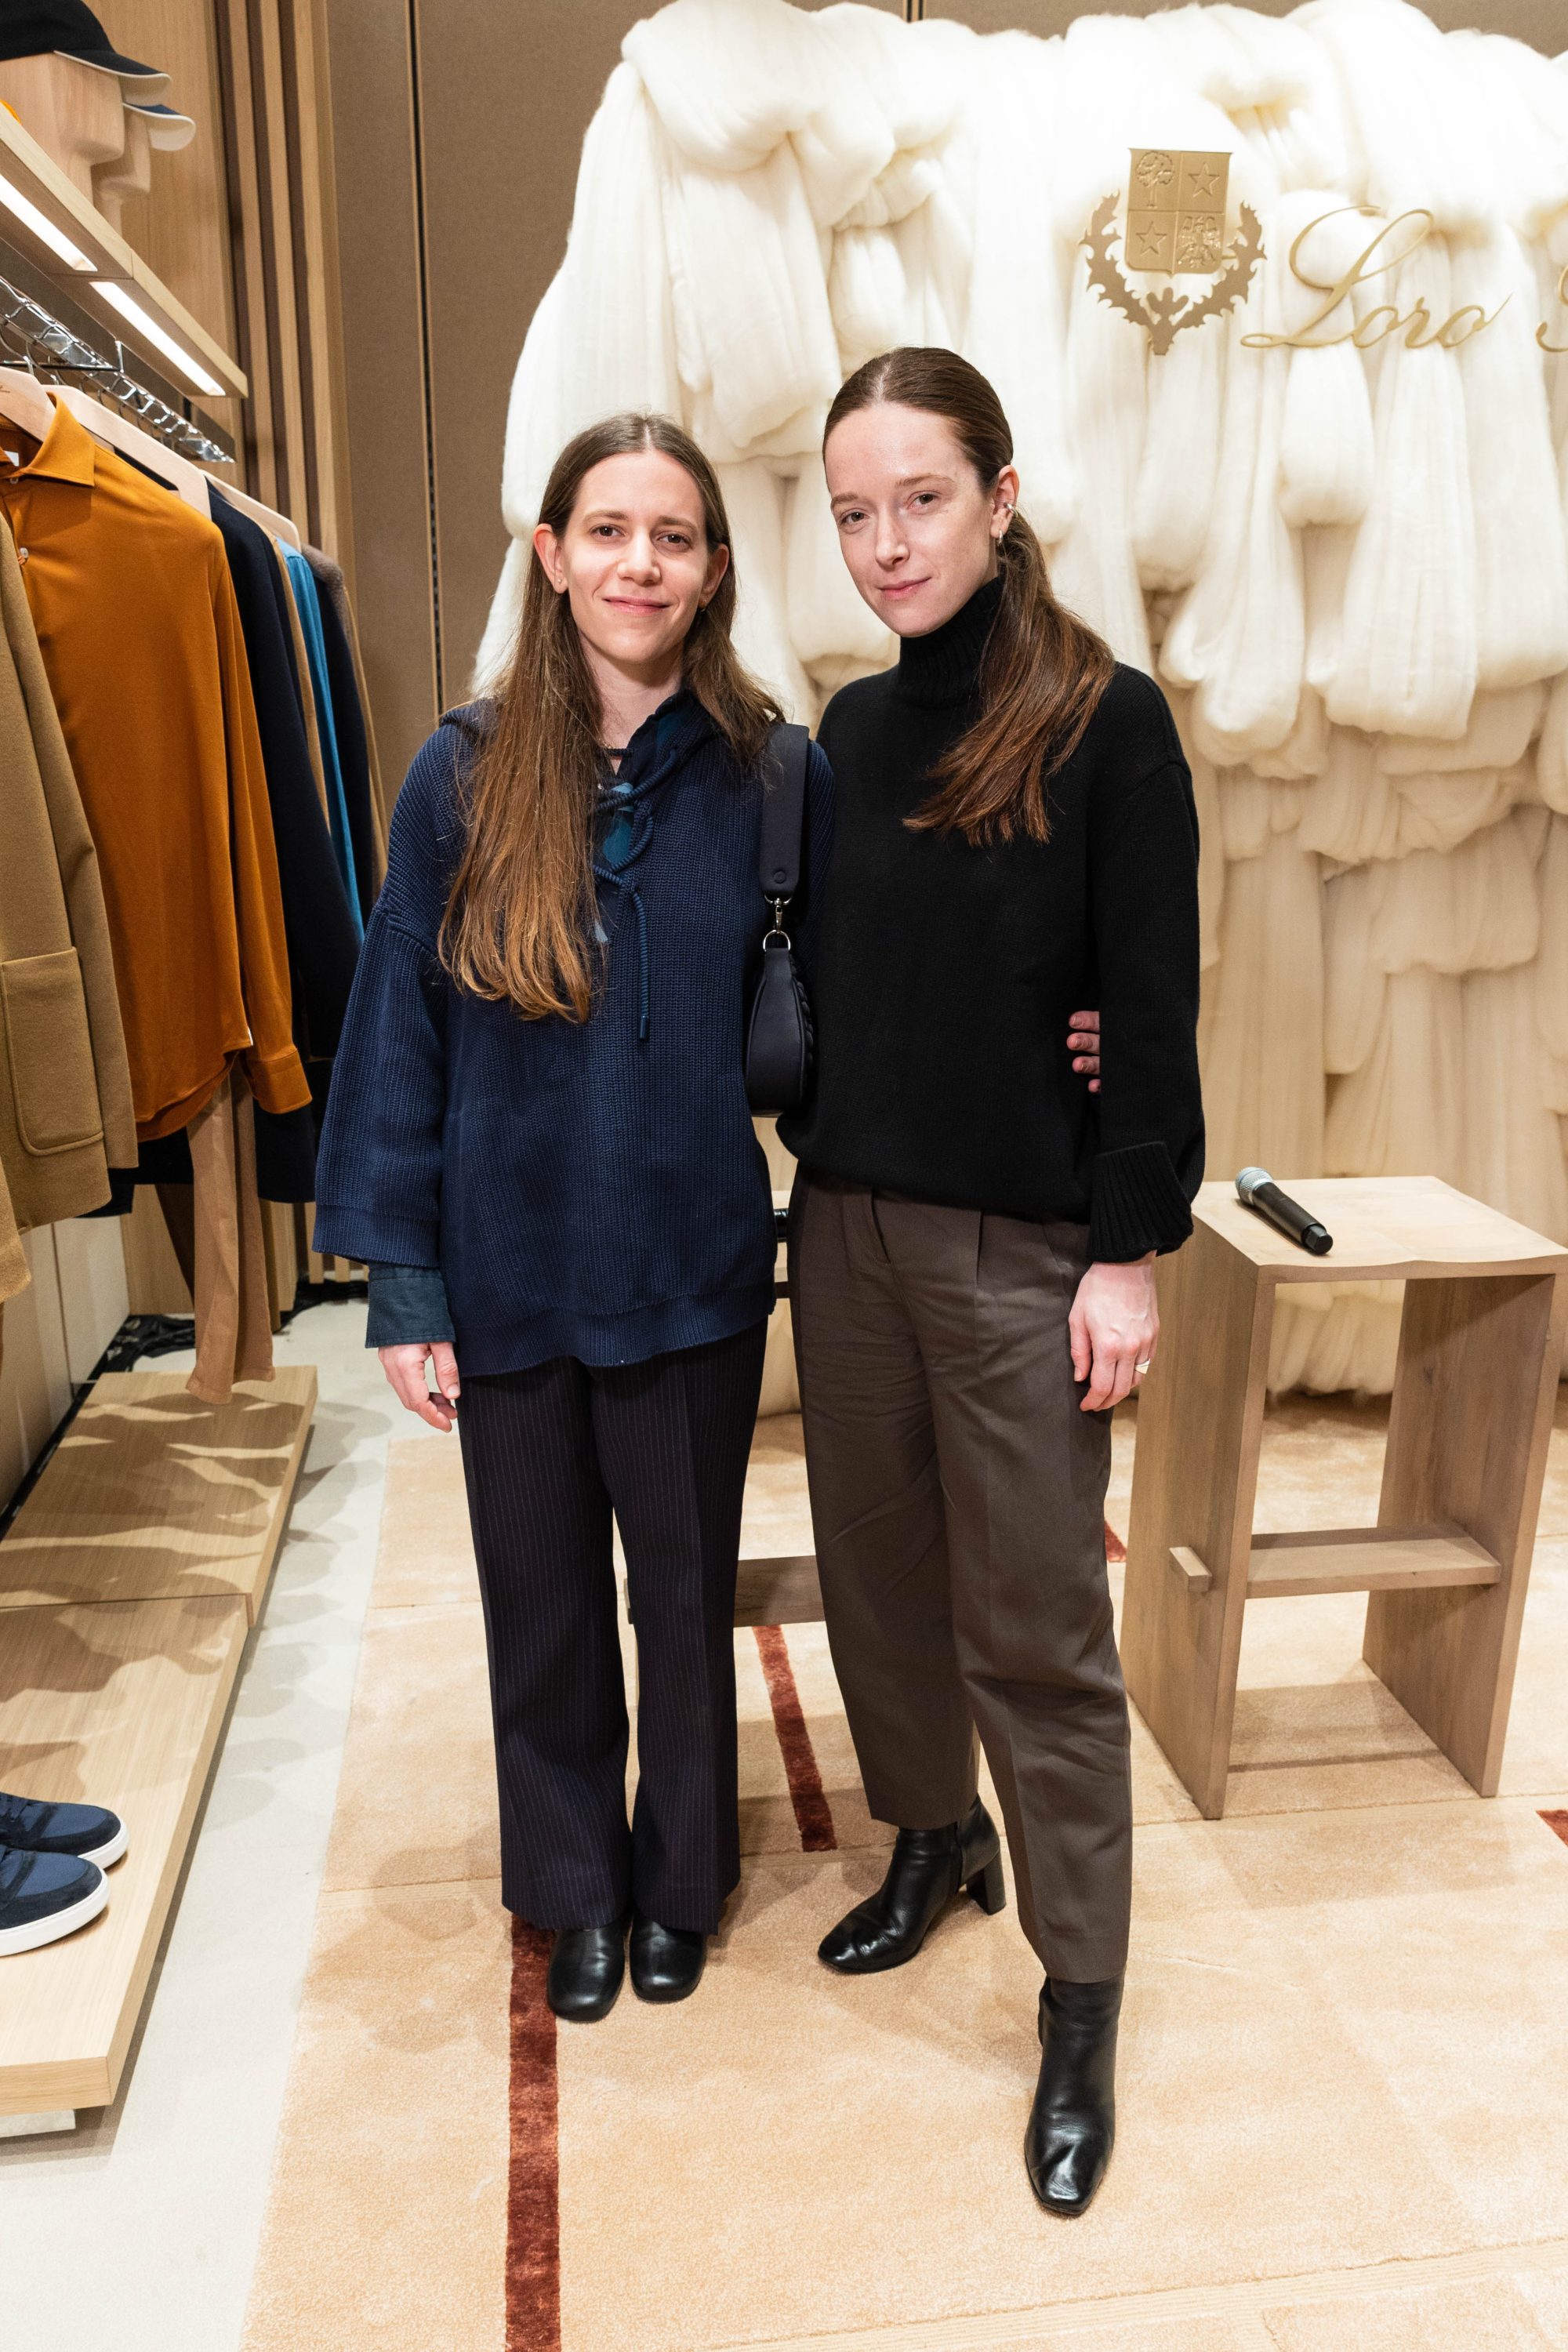 Loro Piana Celebrates Community and a New Store Opening With a